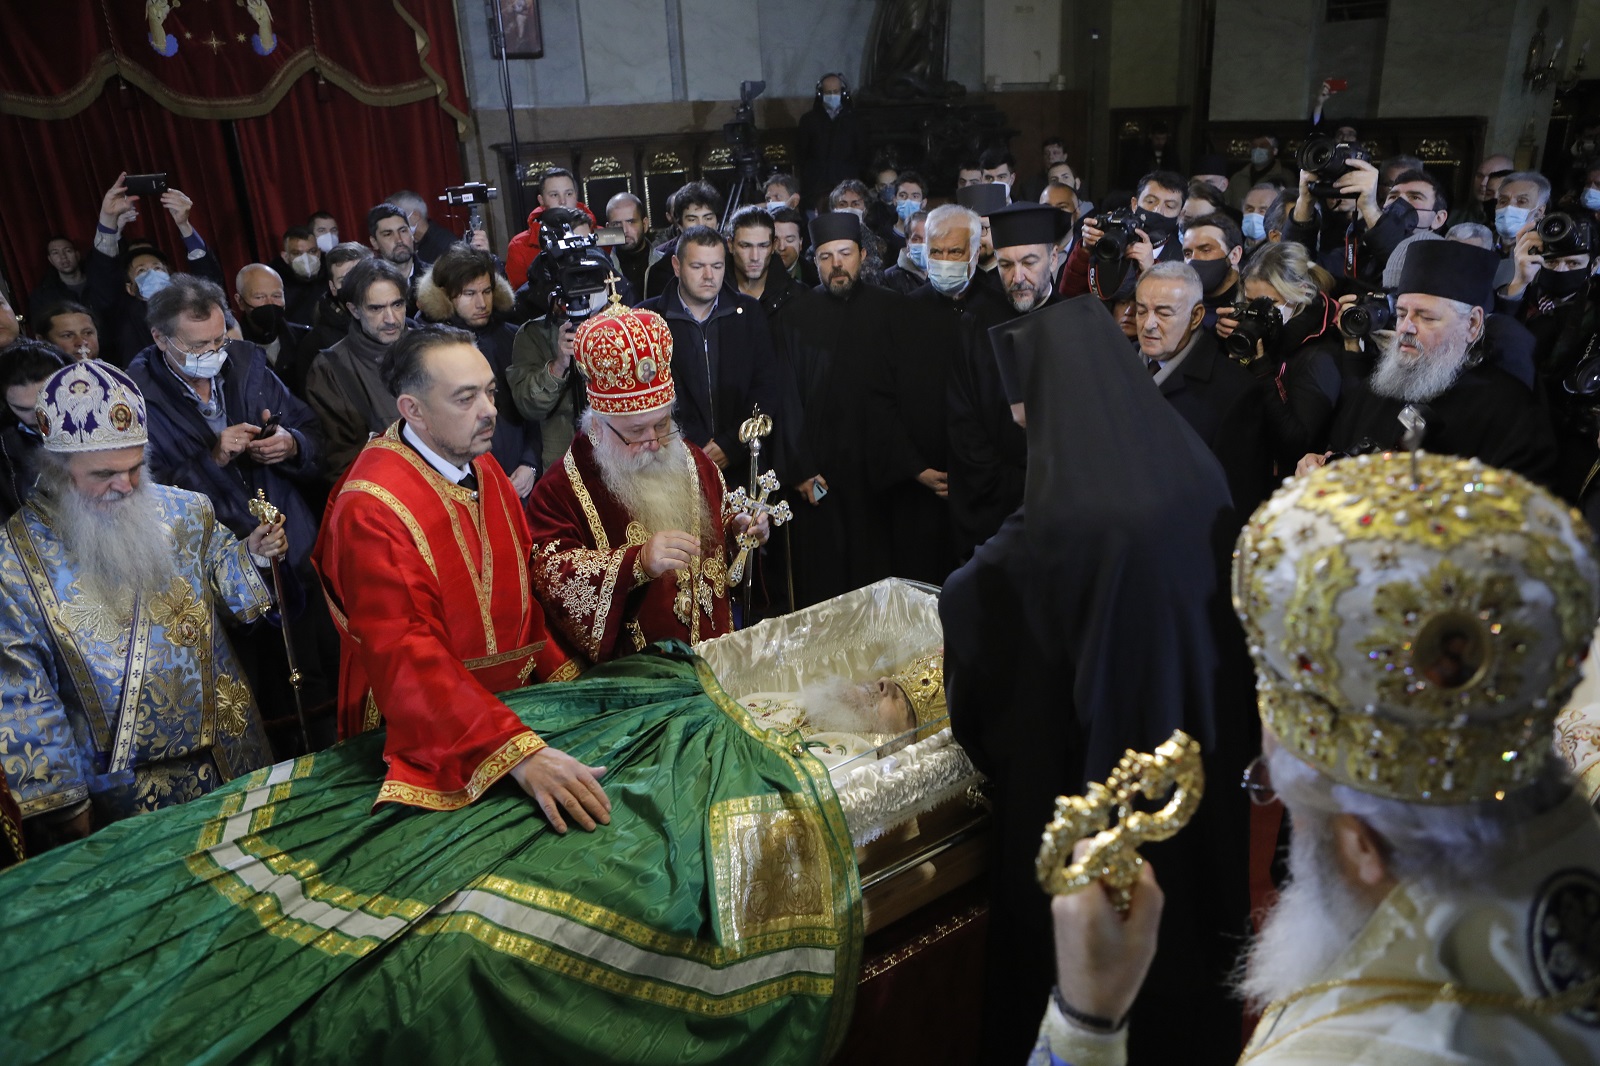 epa08832404 Priests pay last respects to the late Serbian Patriarch Irinej in Belgrade, Serbia, 21 November 2020. According to media reports Patriarch Irinej died on 20 November 2020 in Belgrade, Serbia at the age of 90 after being admitted to a hospital for having symptoms of Covid-19 disease.  EPA/MARKO DJOKOVIC